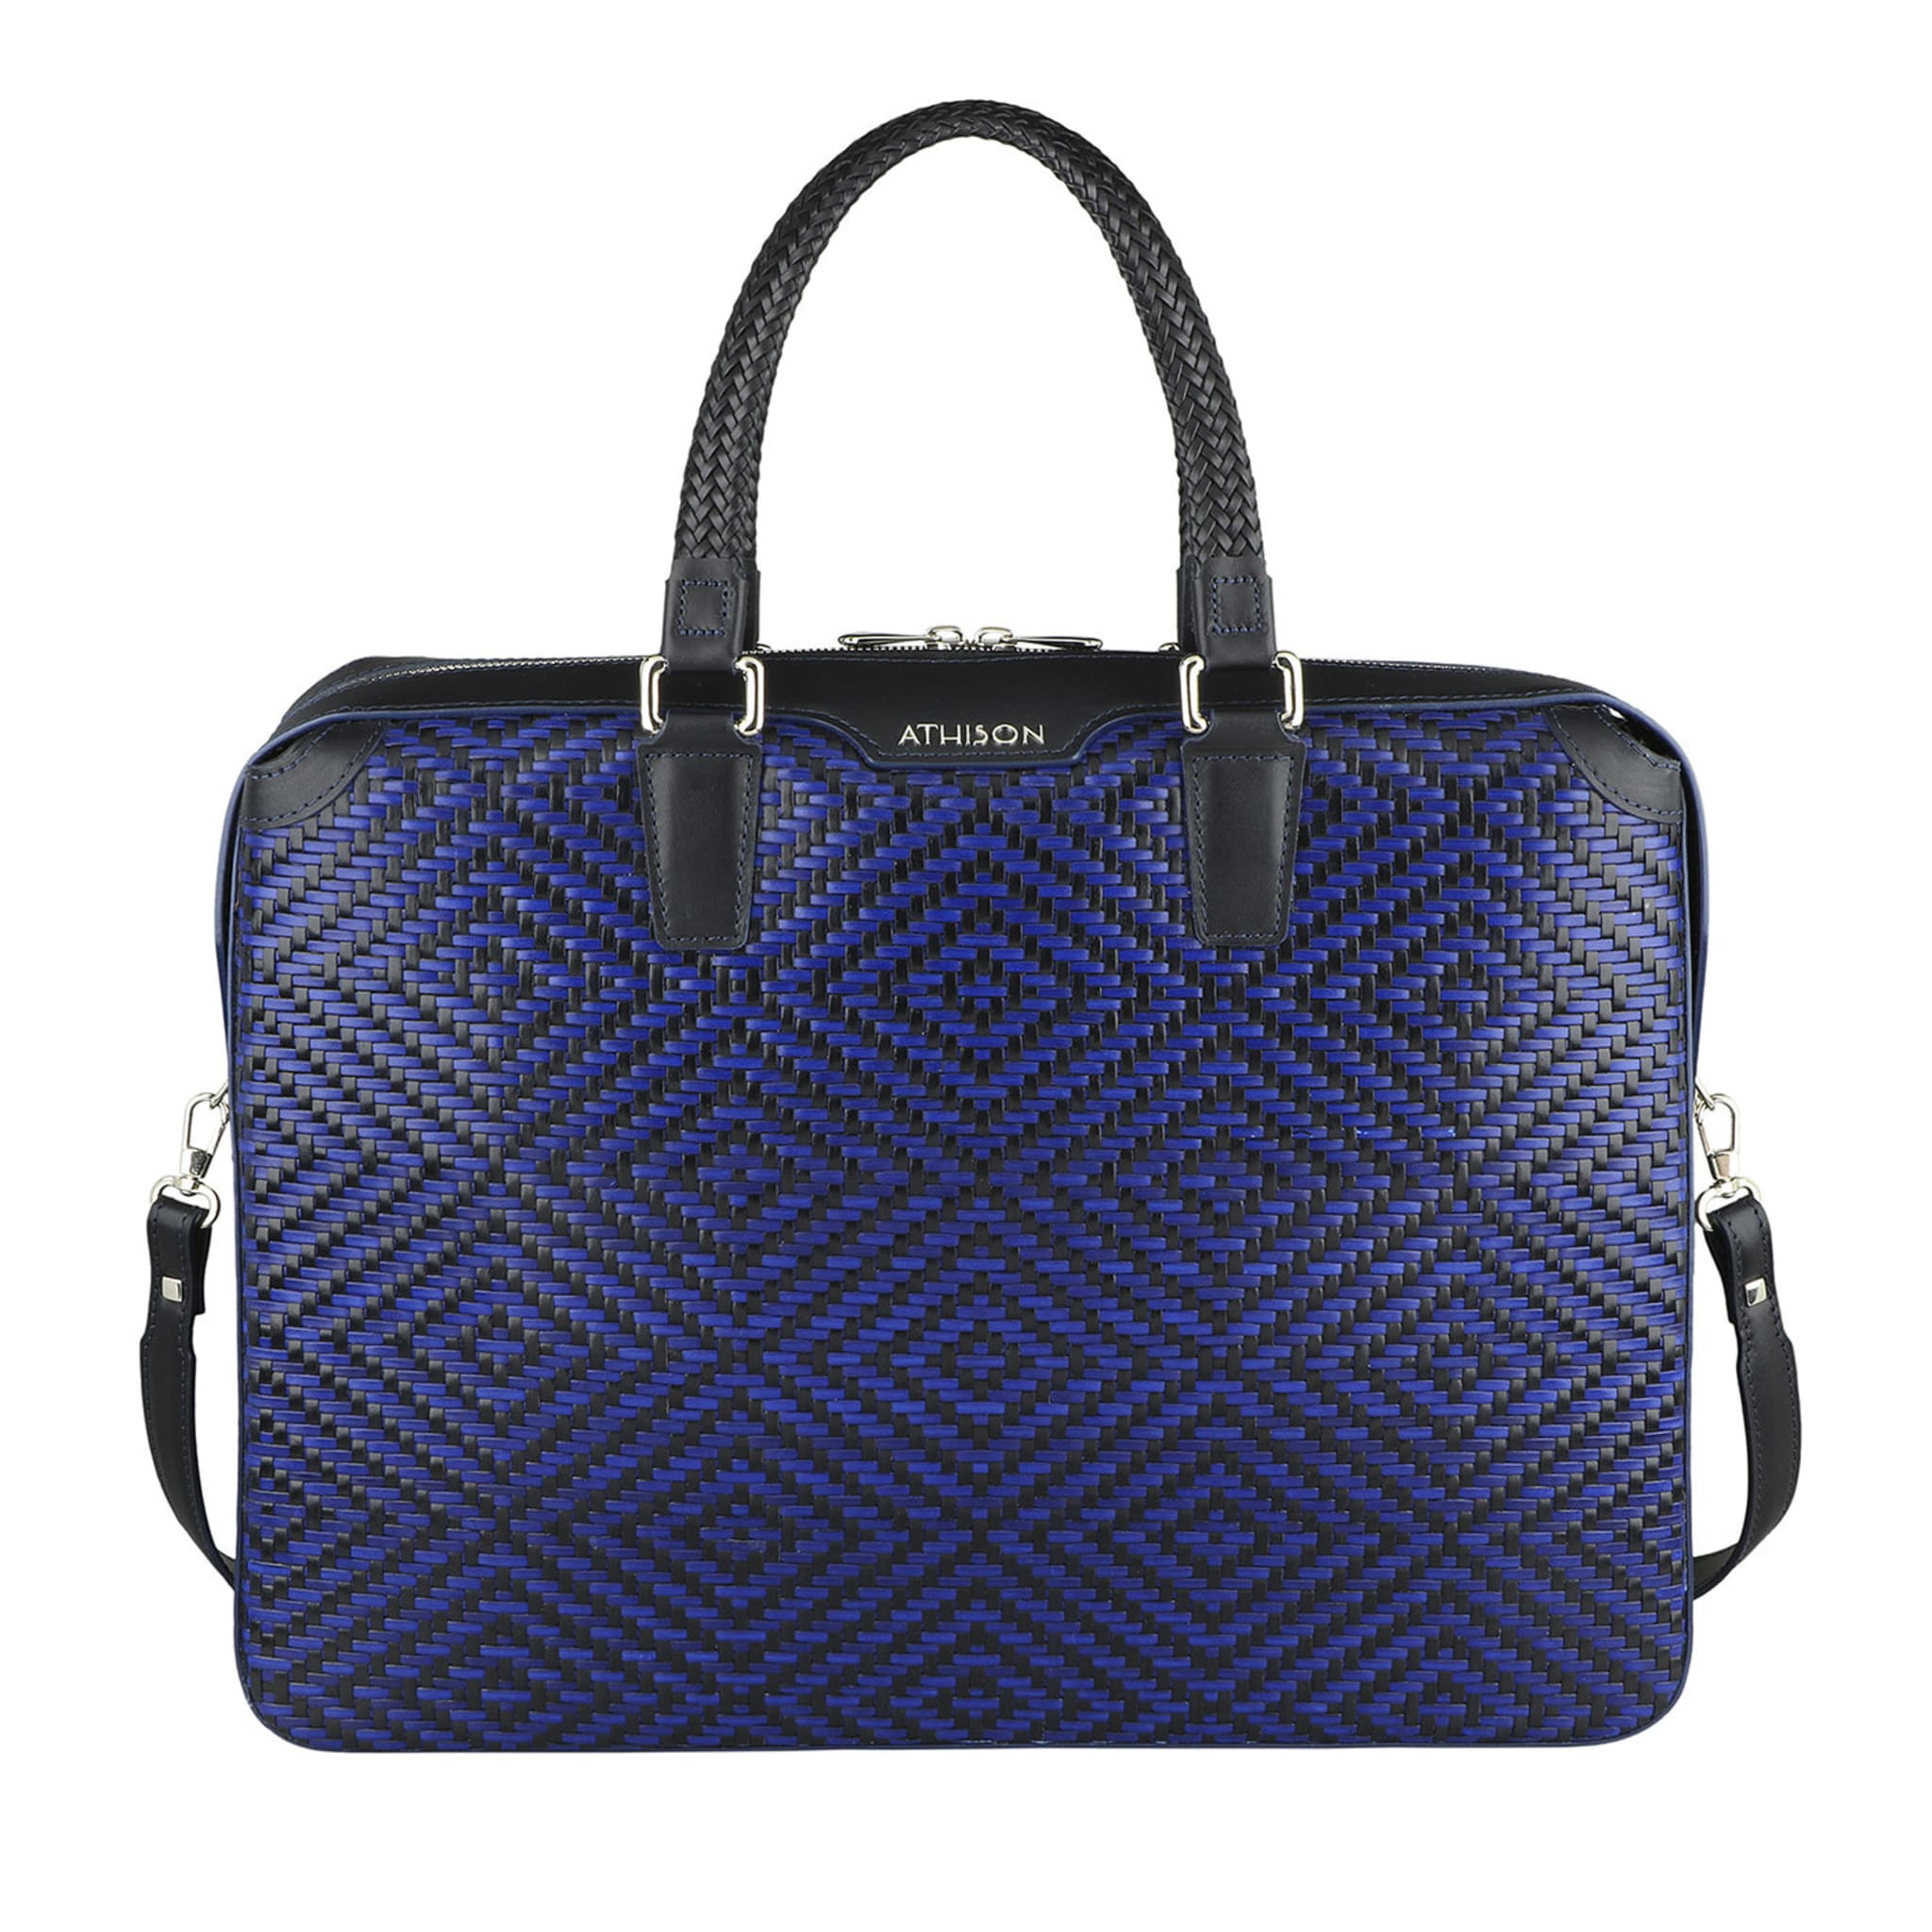 Braided Leather Business Bag “Premia” - Black and Blue - Main view